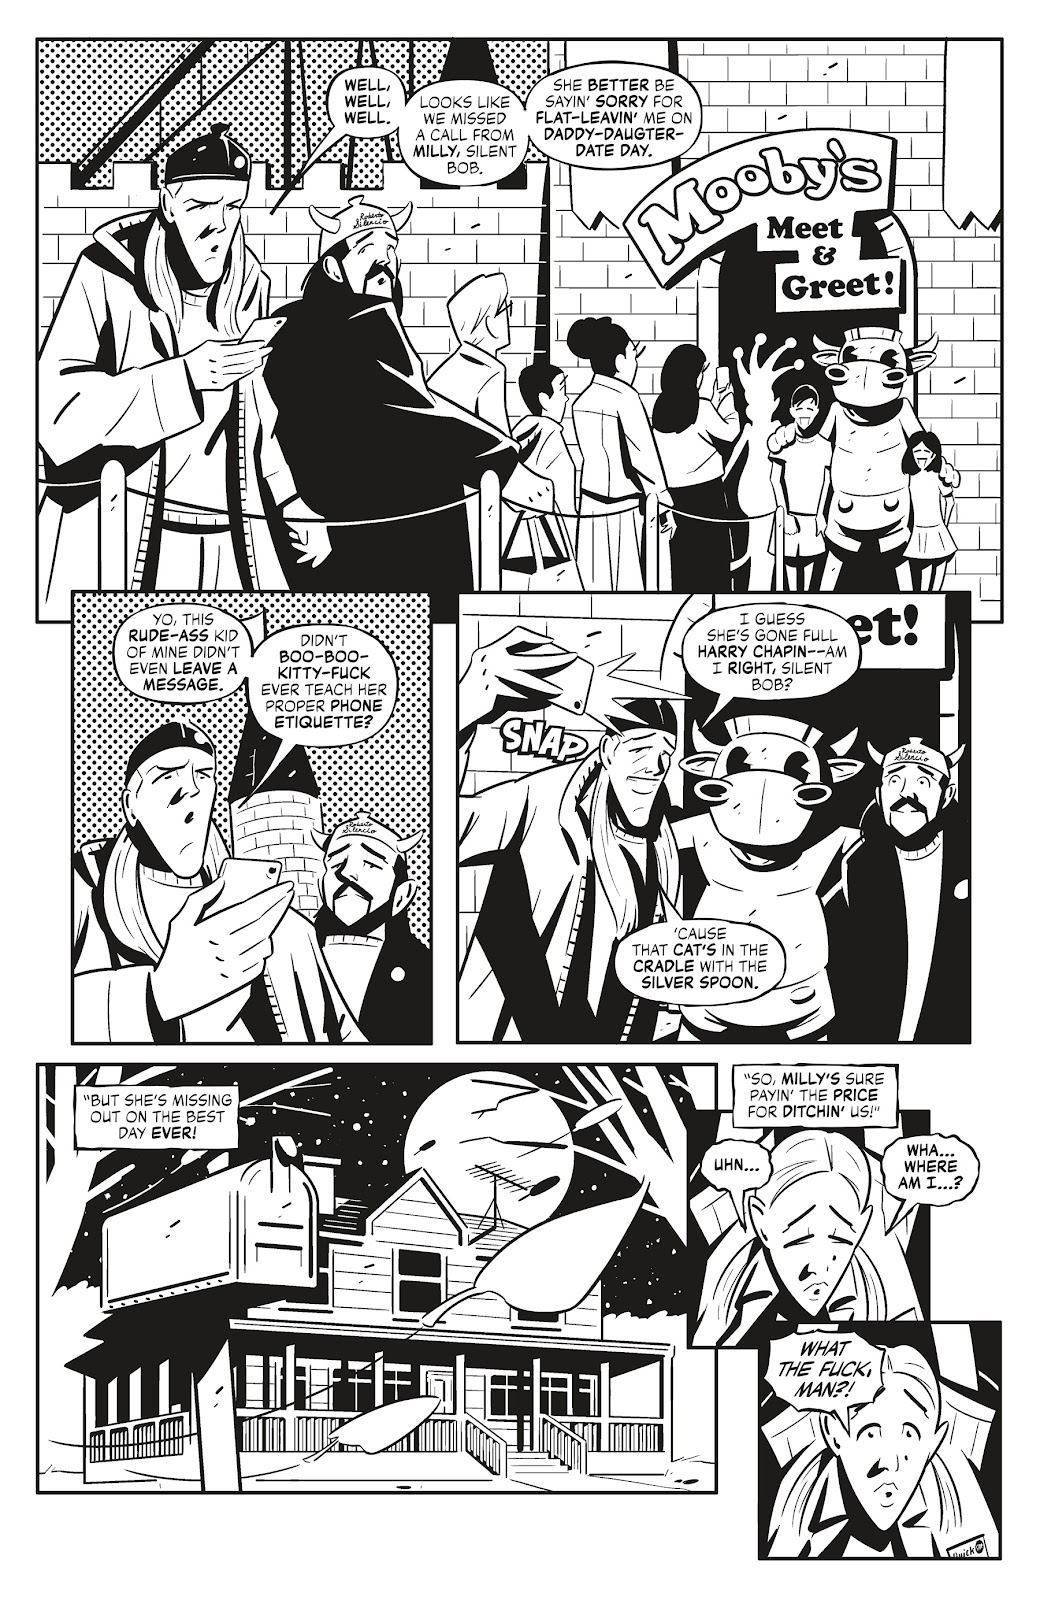 Quick Stops Vol. 2 issue 4 - Page 10